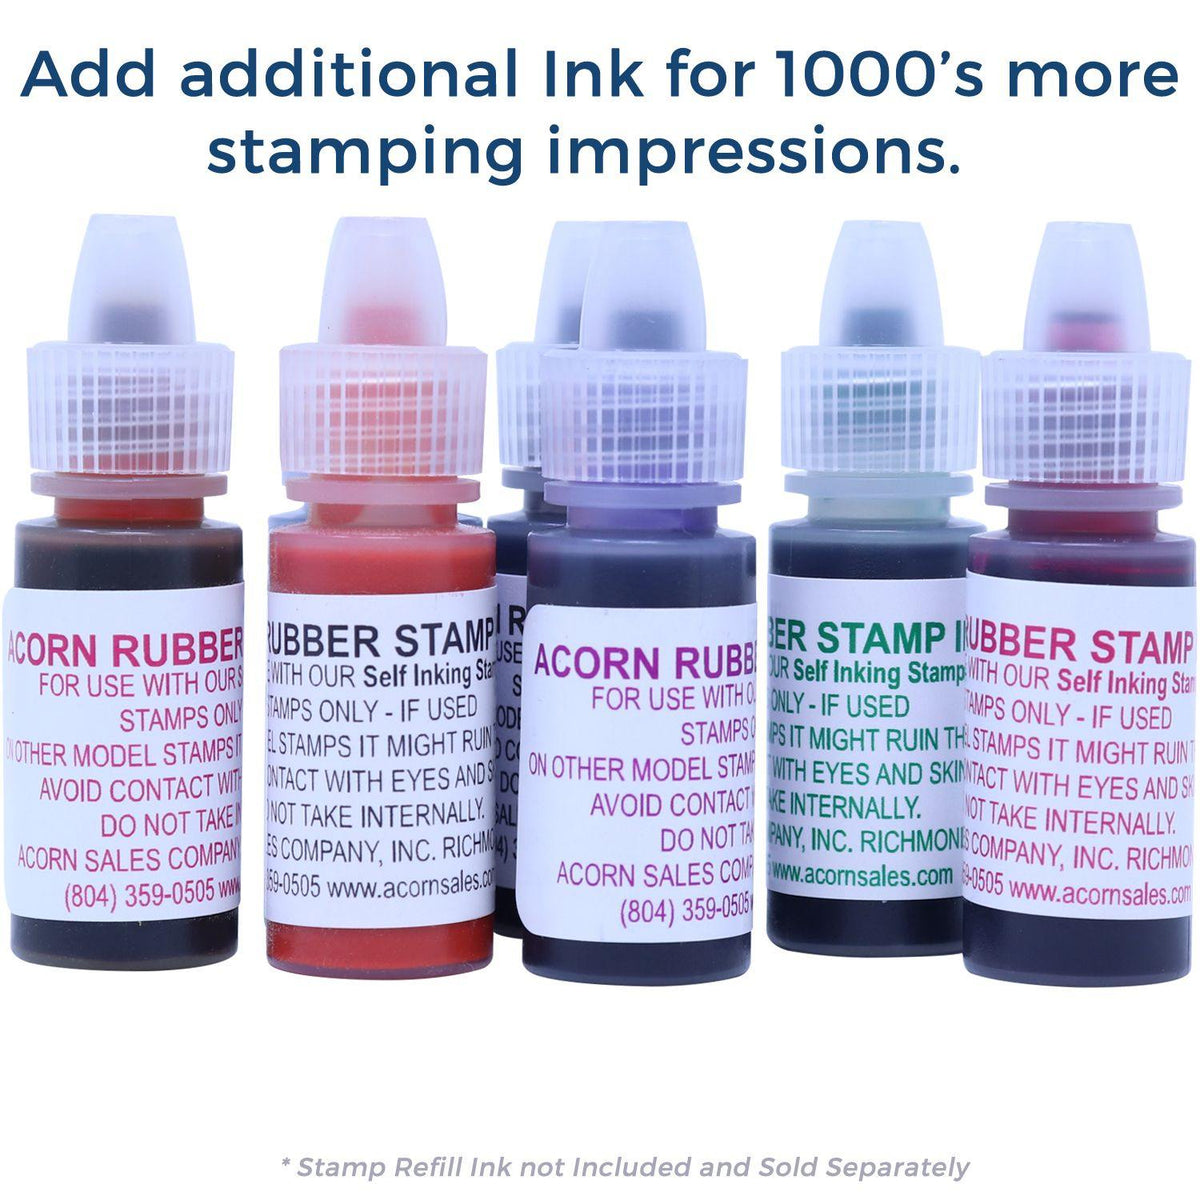 Refill Inks for Slim Pre-Inked E-mailed with Date Box Stamp Available